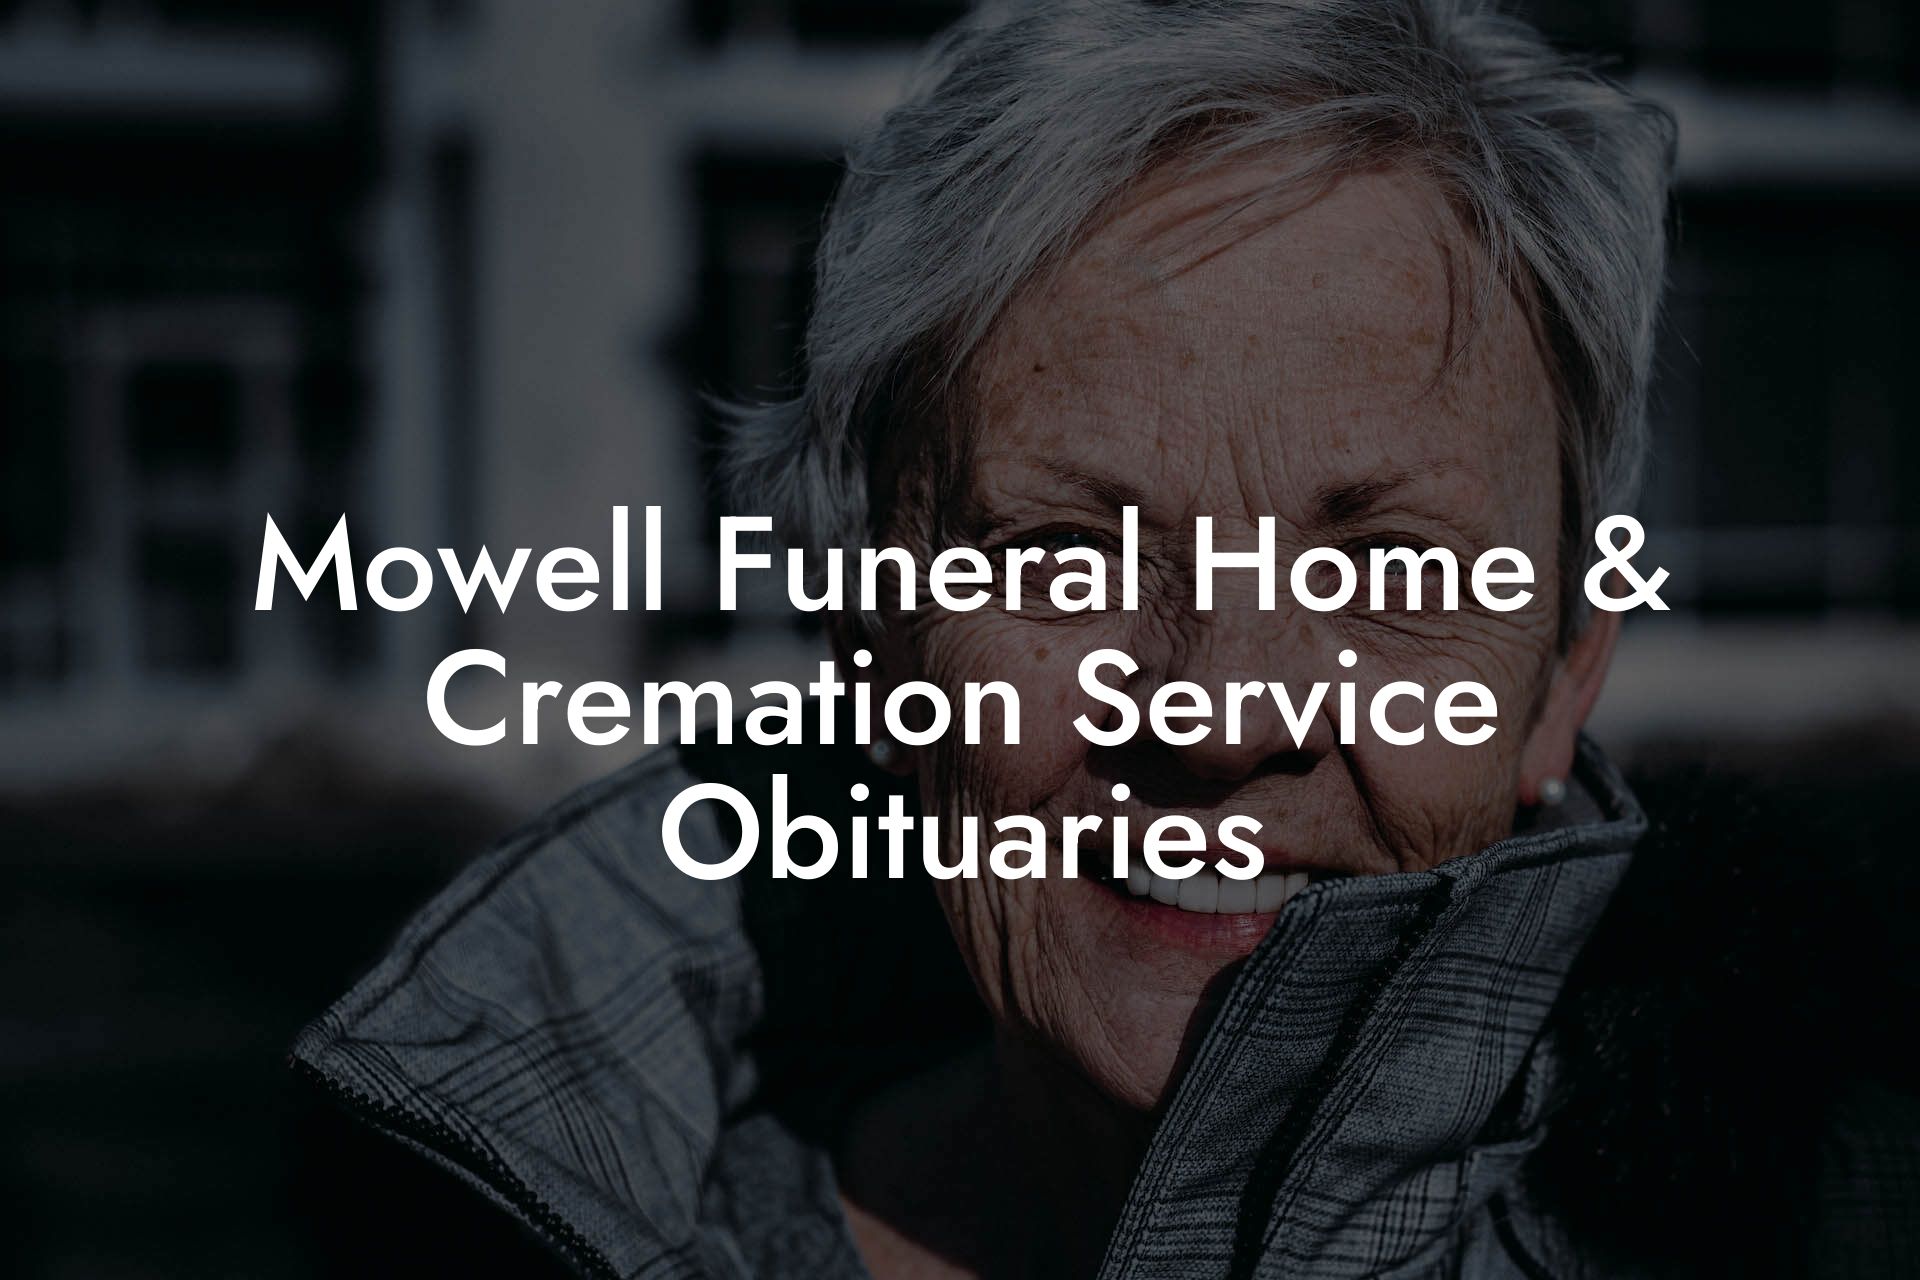 Mowell Funeral Home & Cremation Service Obituaries - Eulogy Assistant